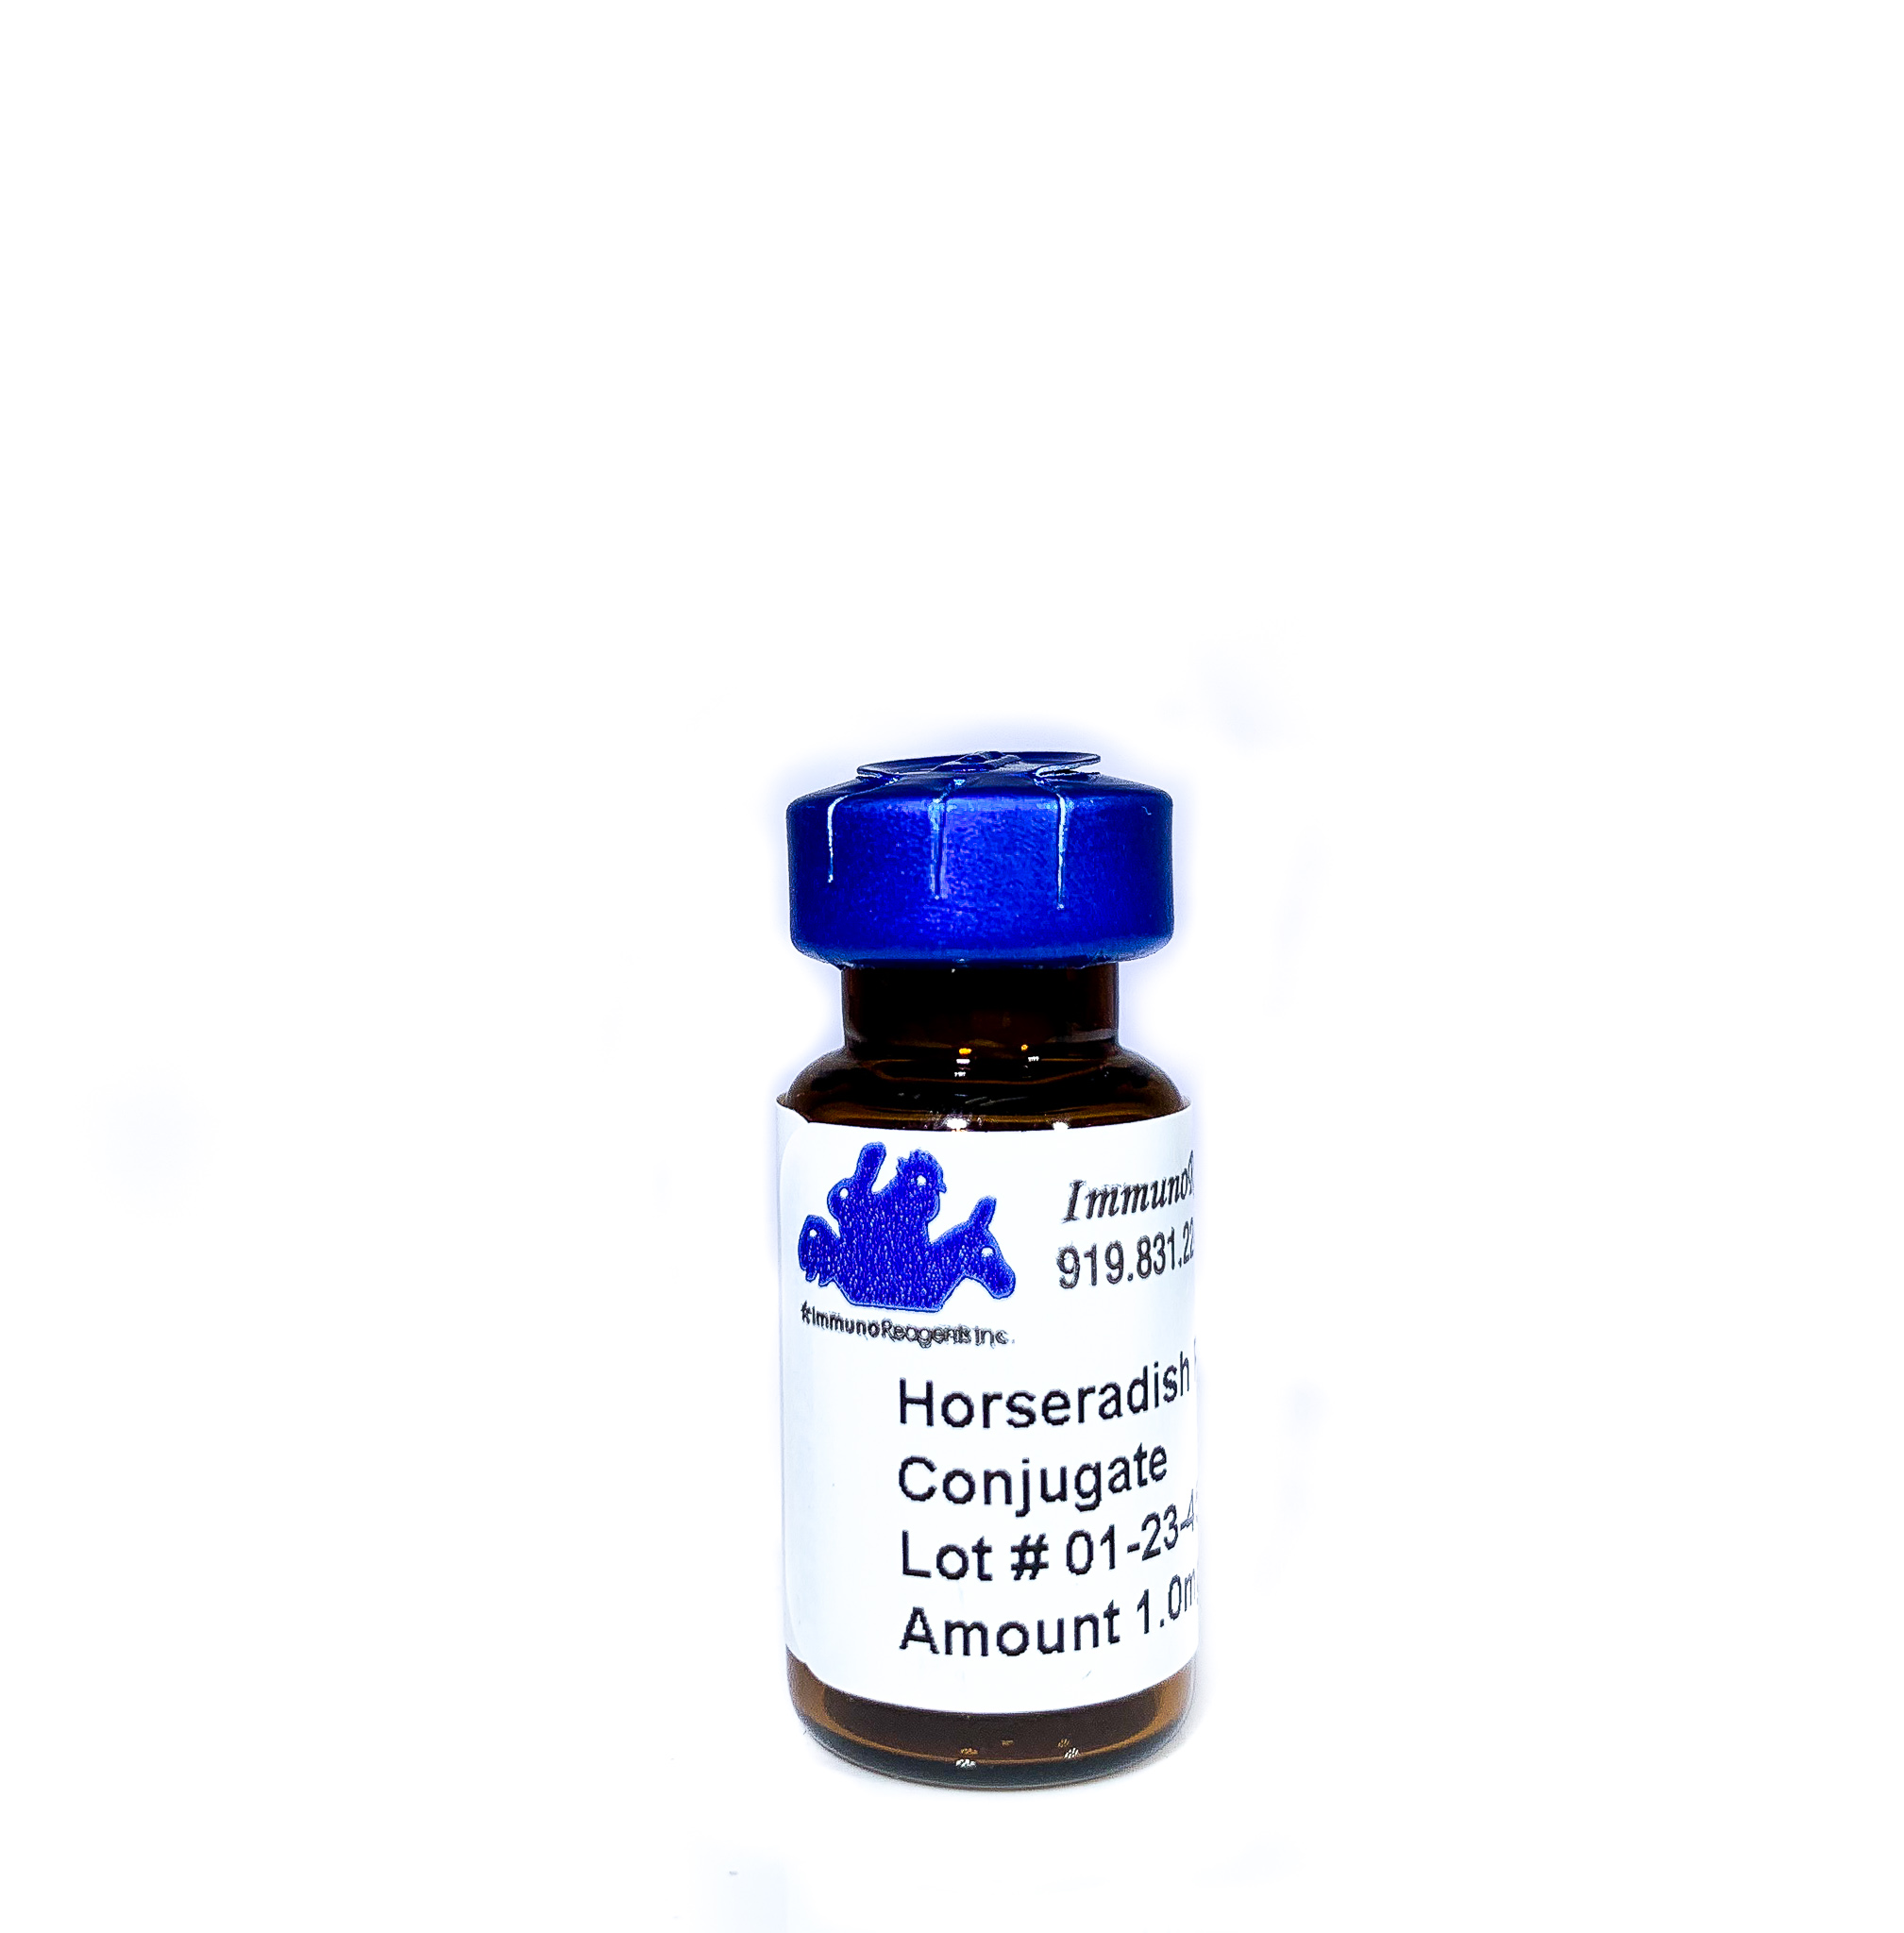 Goat Anti-Mouse IgG (H+L) Secondary Antibody, Cy3 Conjugated